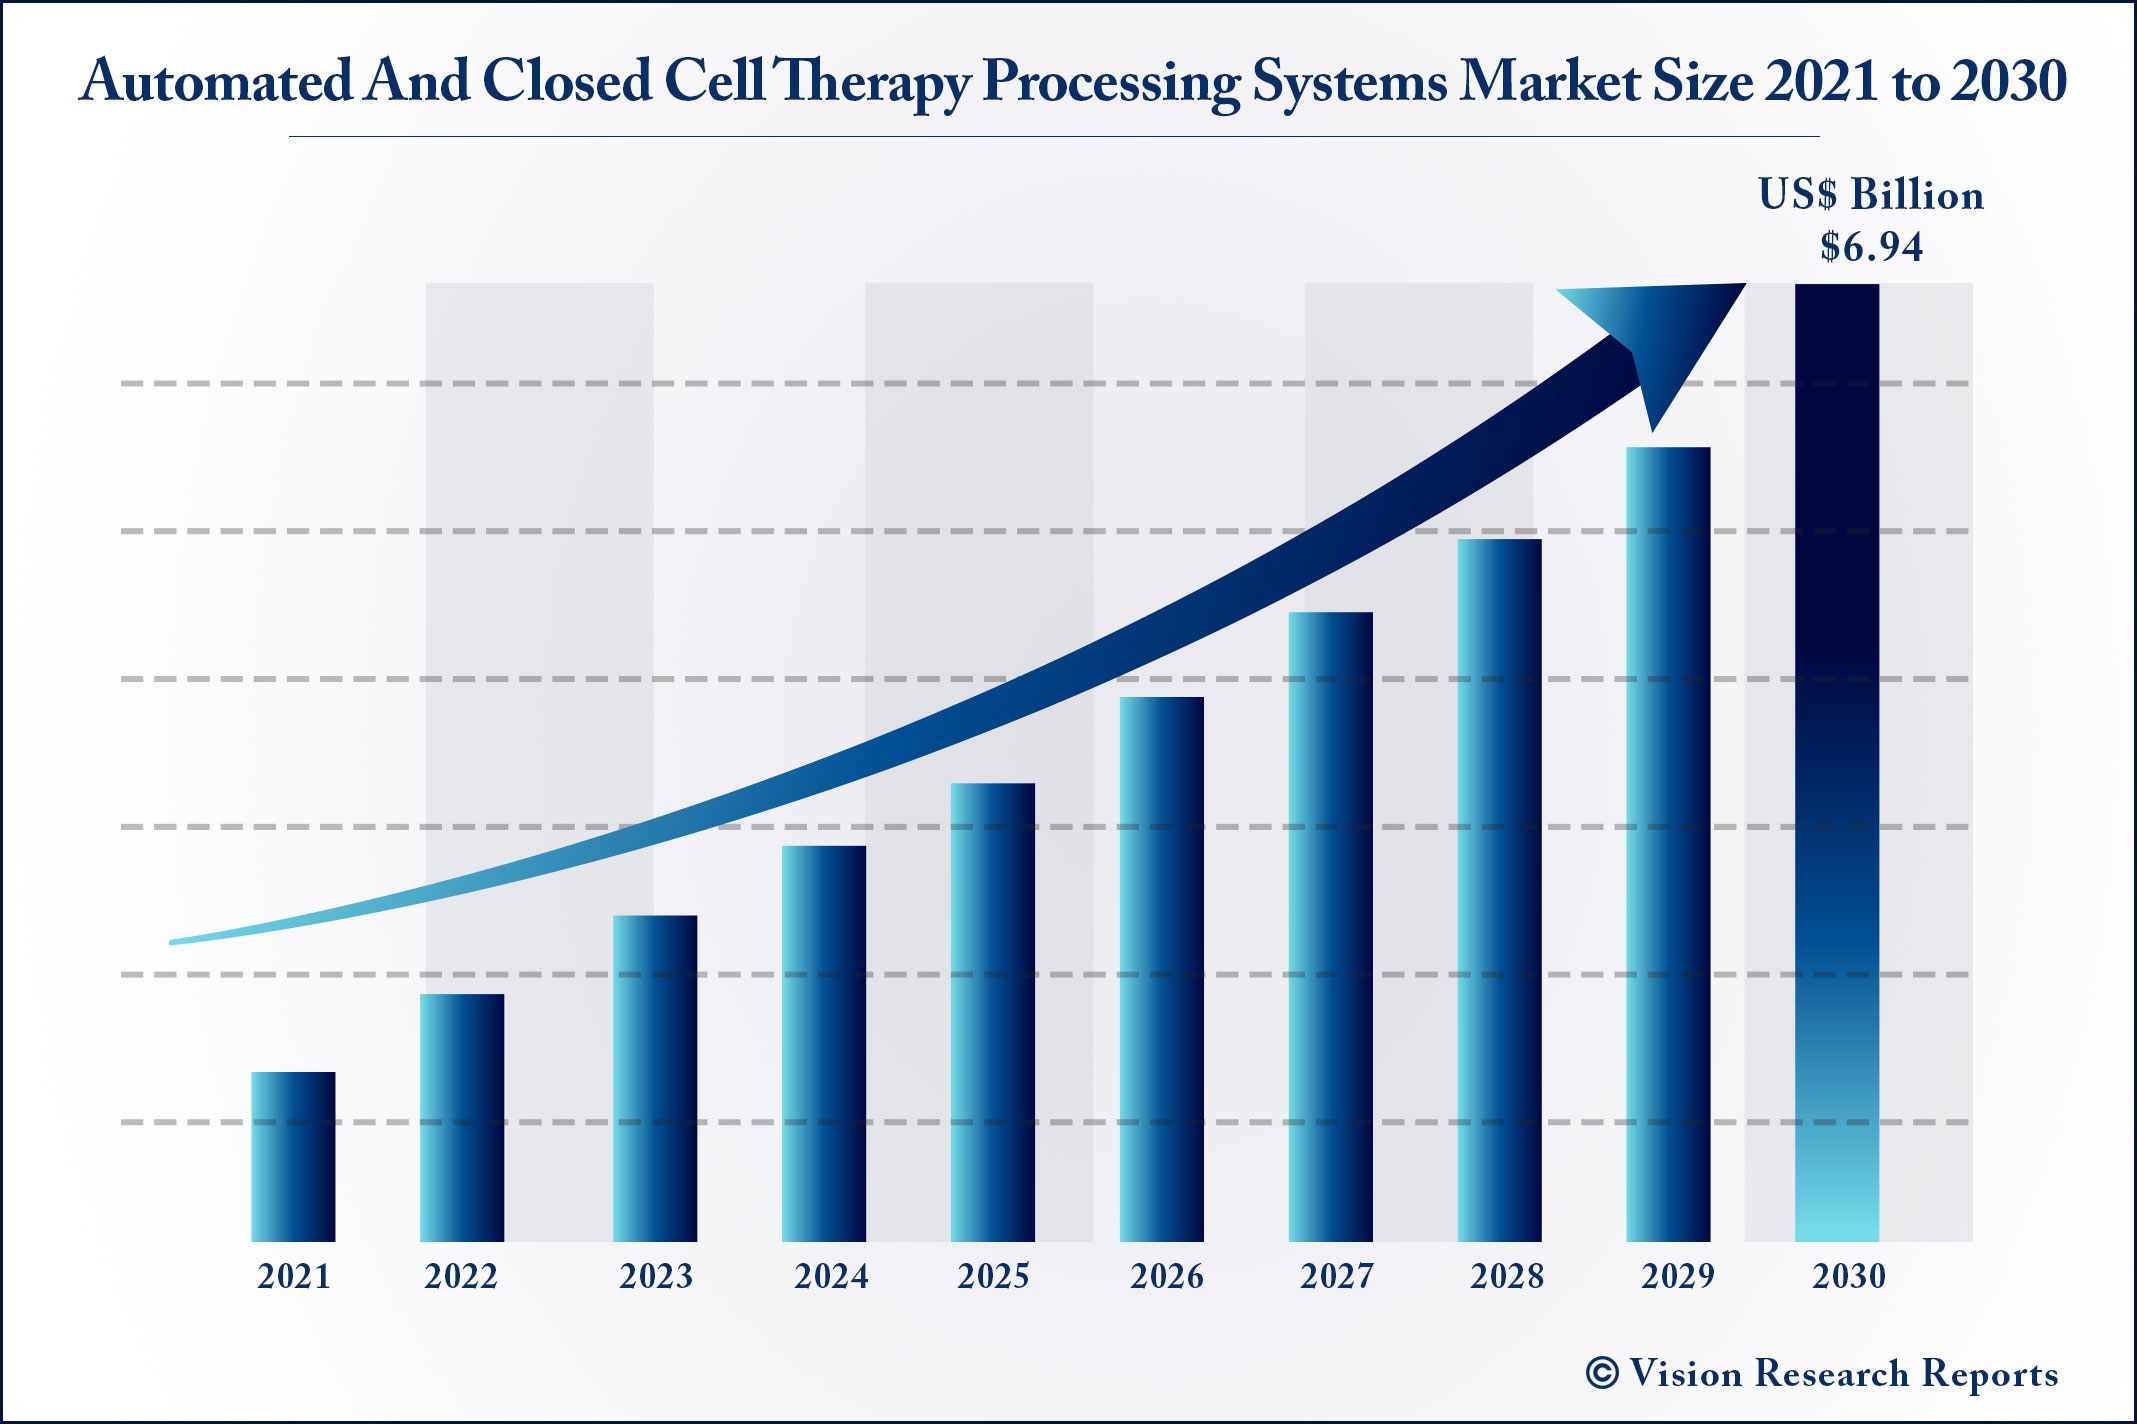 Automated And Closed Cell Therapy Processing Systems Market Size 2021 to 2030